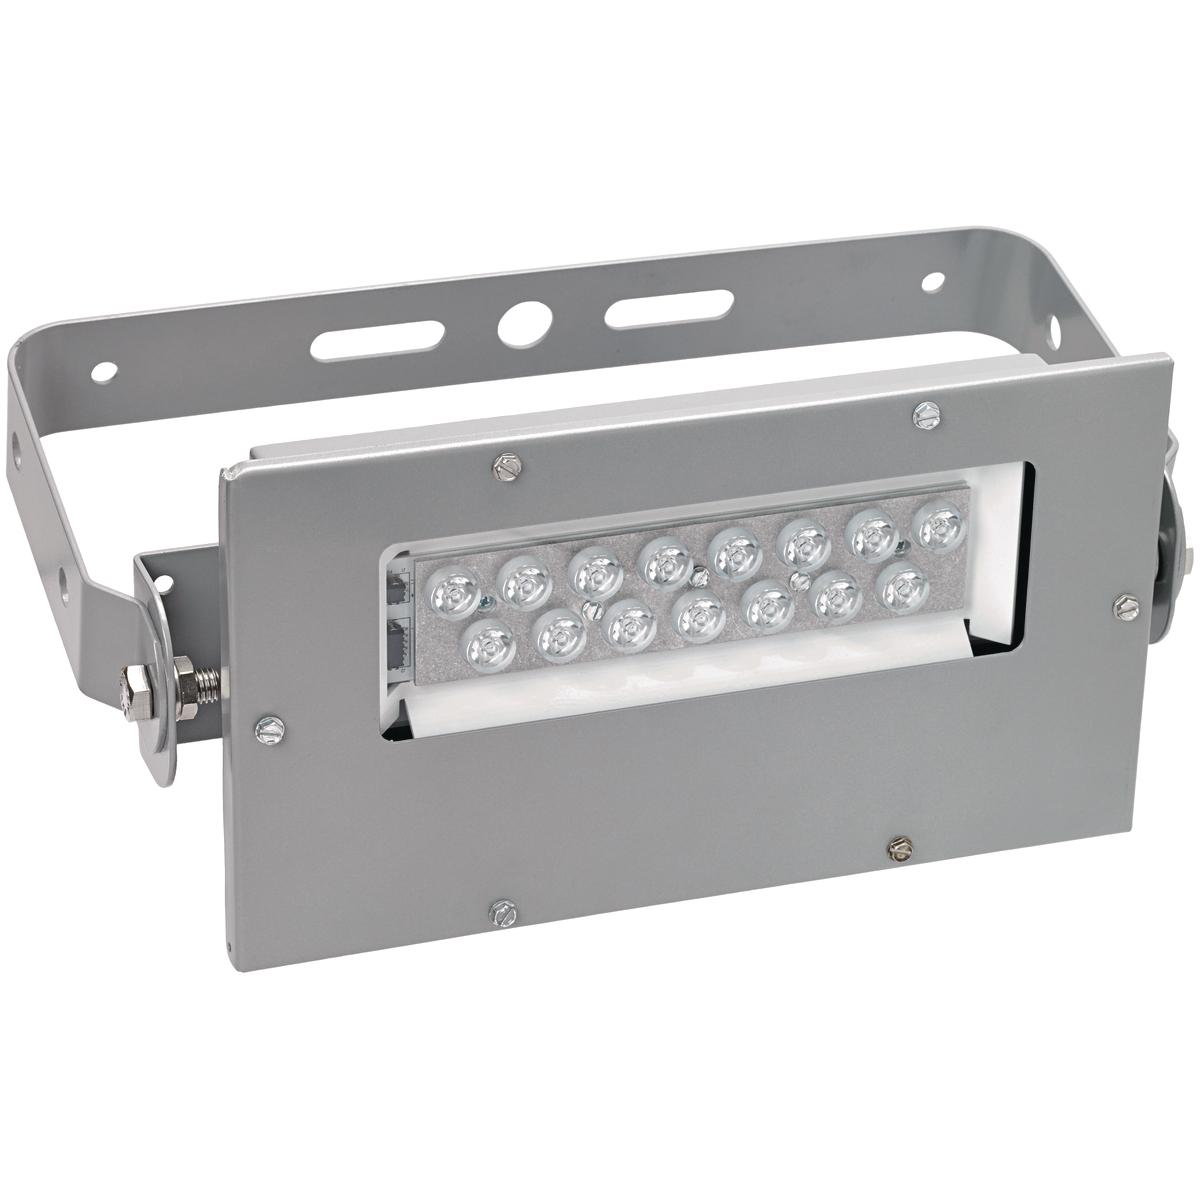 Hubbell KFLC2030 The KFLC Series compact LED floodlights are designed with a copper-free aluminum housing and painted with a powder epoxy finish for superior corrosion resistance in harsh and hazardous environments. Killark LED floodlights provide a crisp white light that